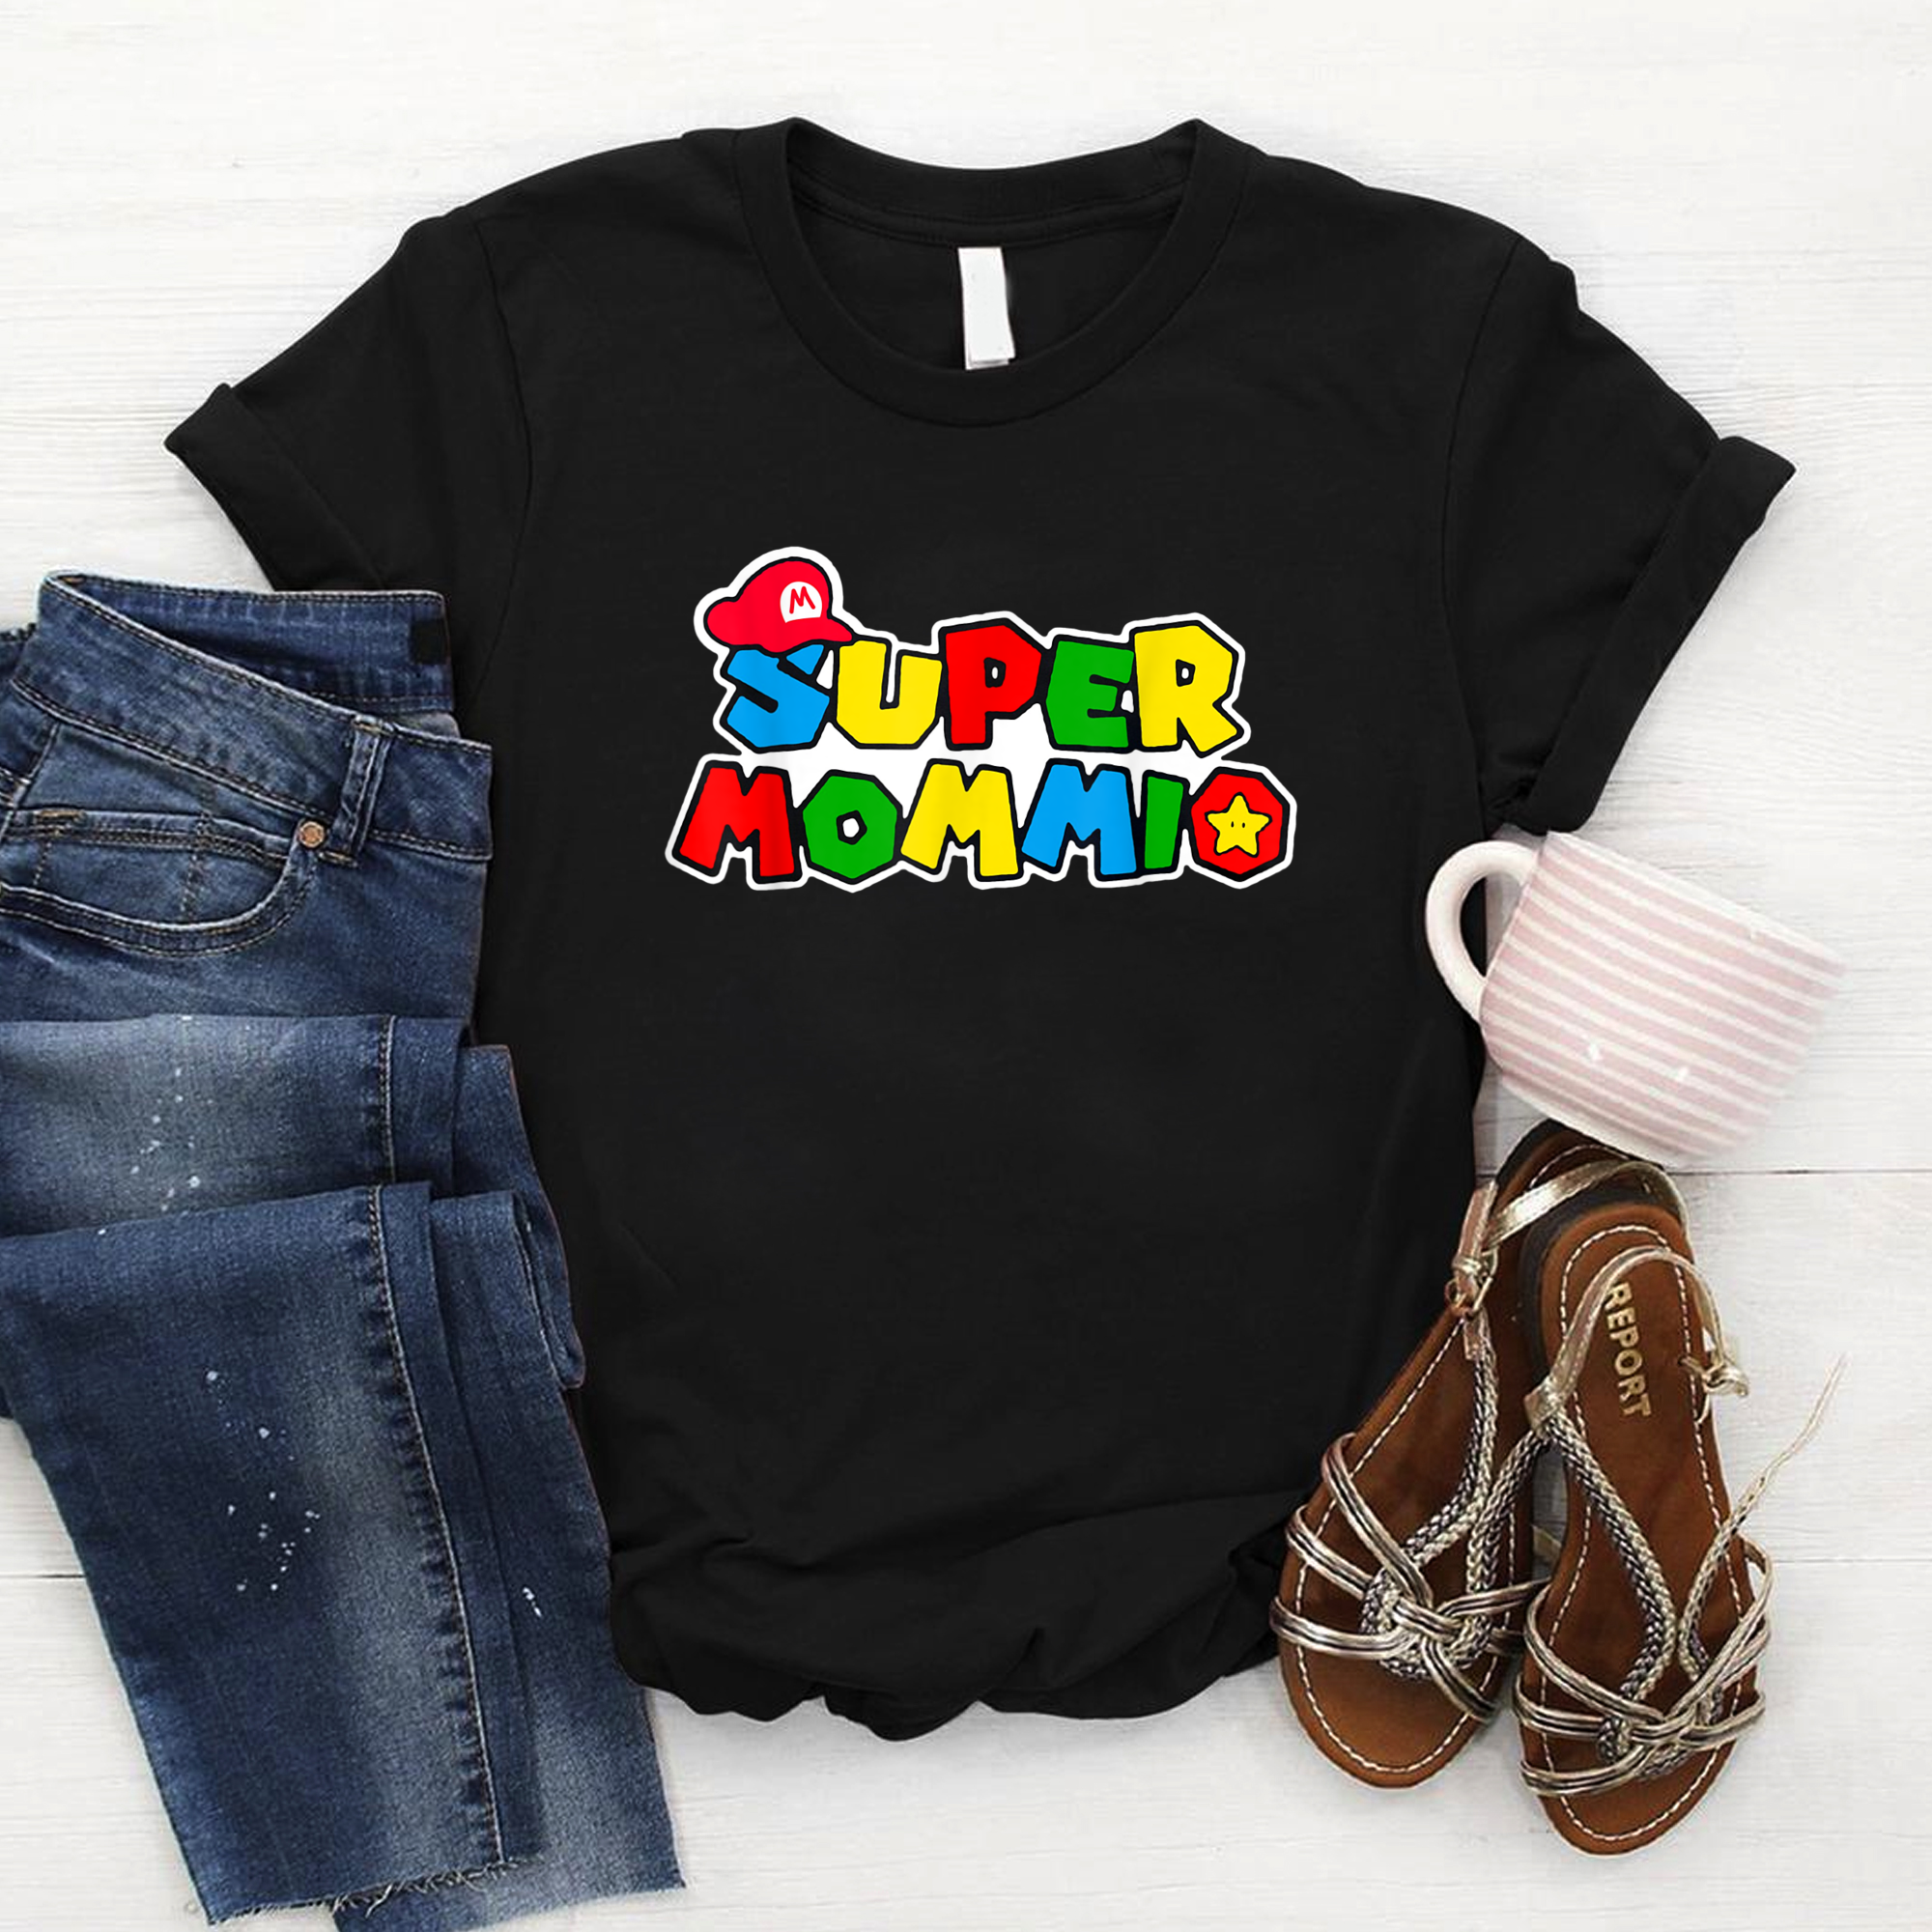 Super Mommio Tshirt, Funny Mommy Mother Nerdy , Video Gaming Lover T-Shirt